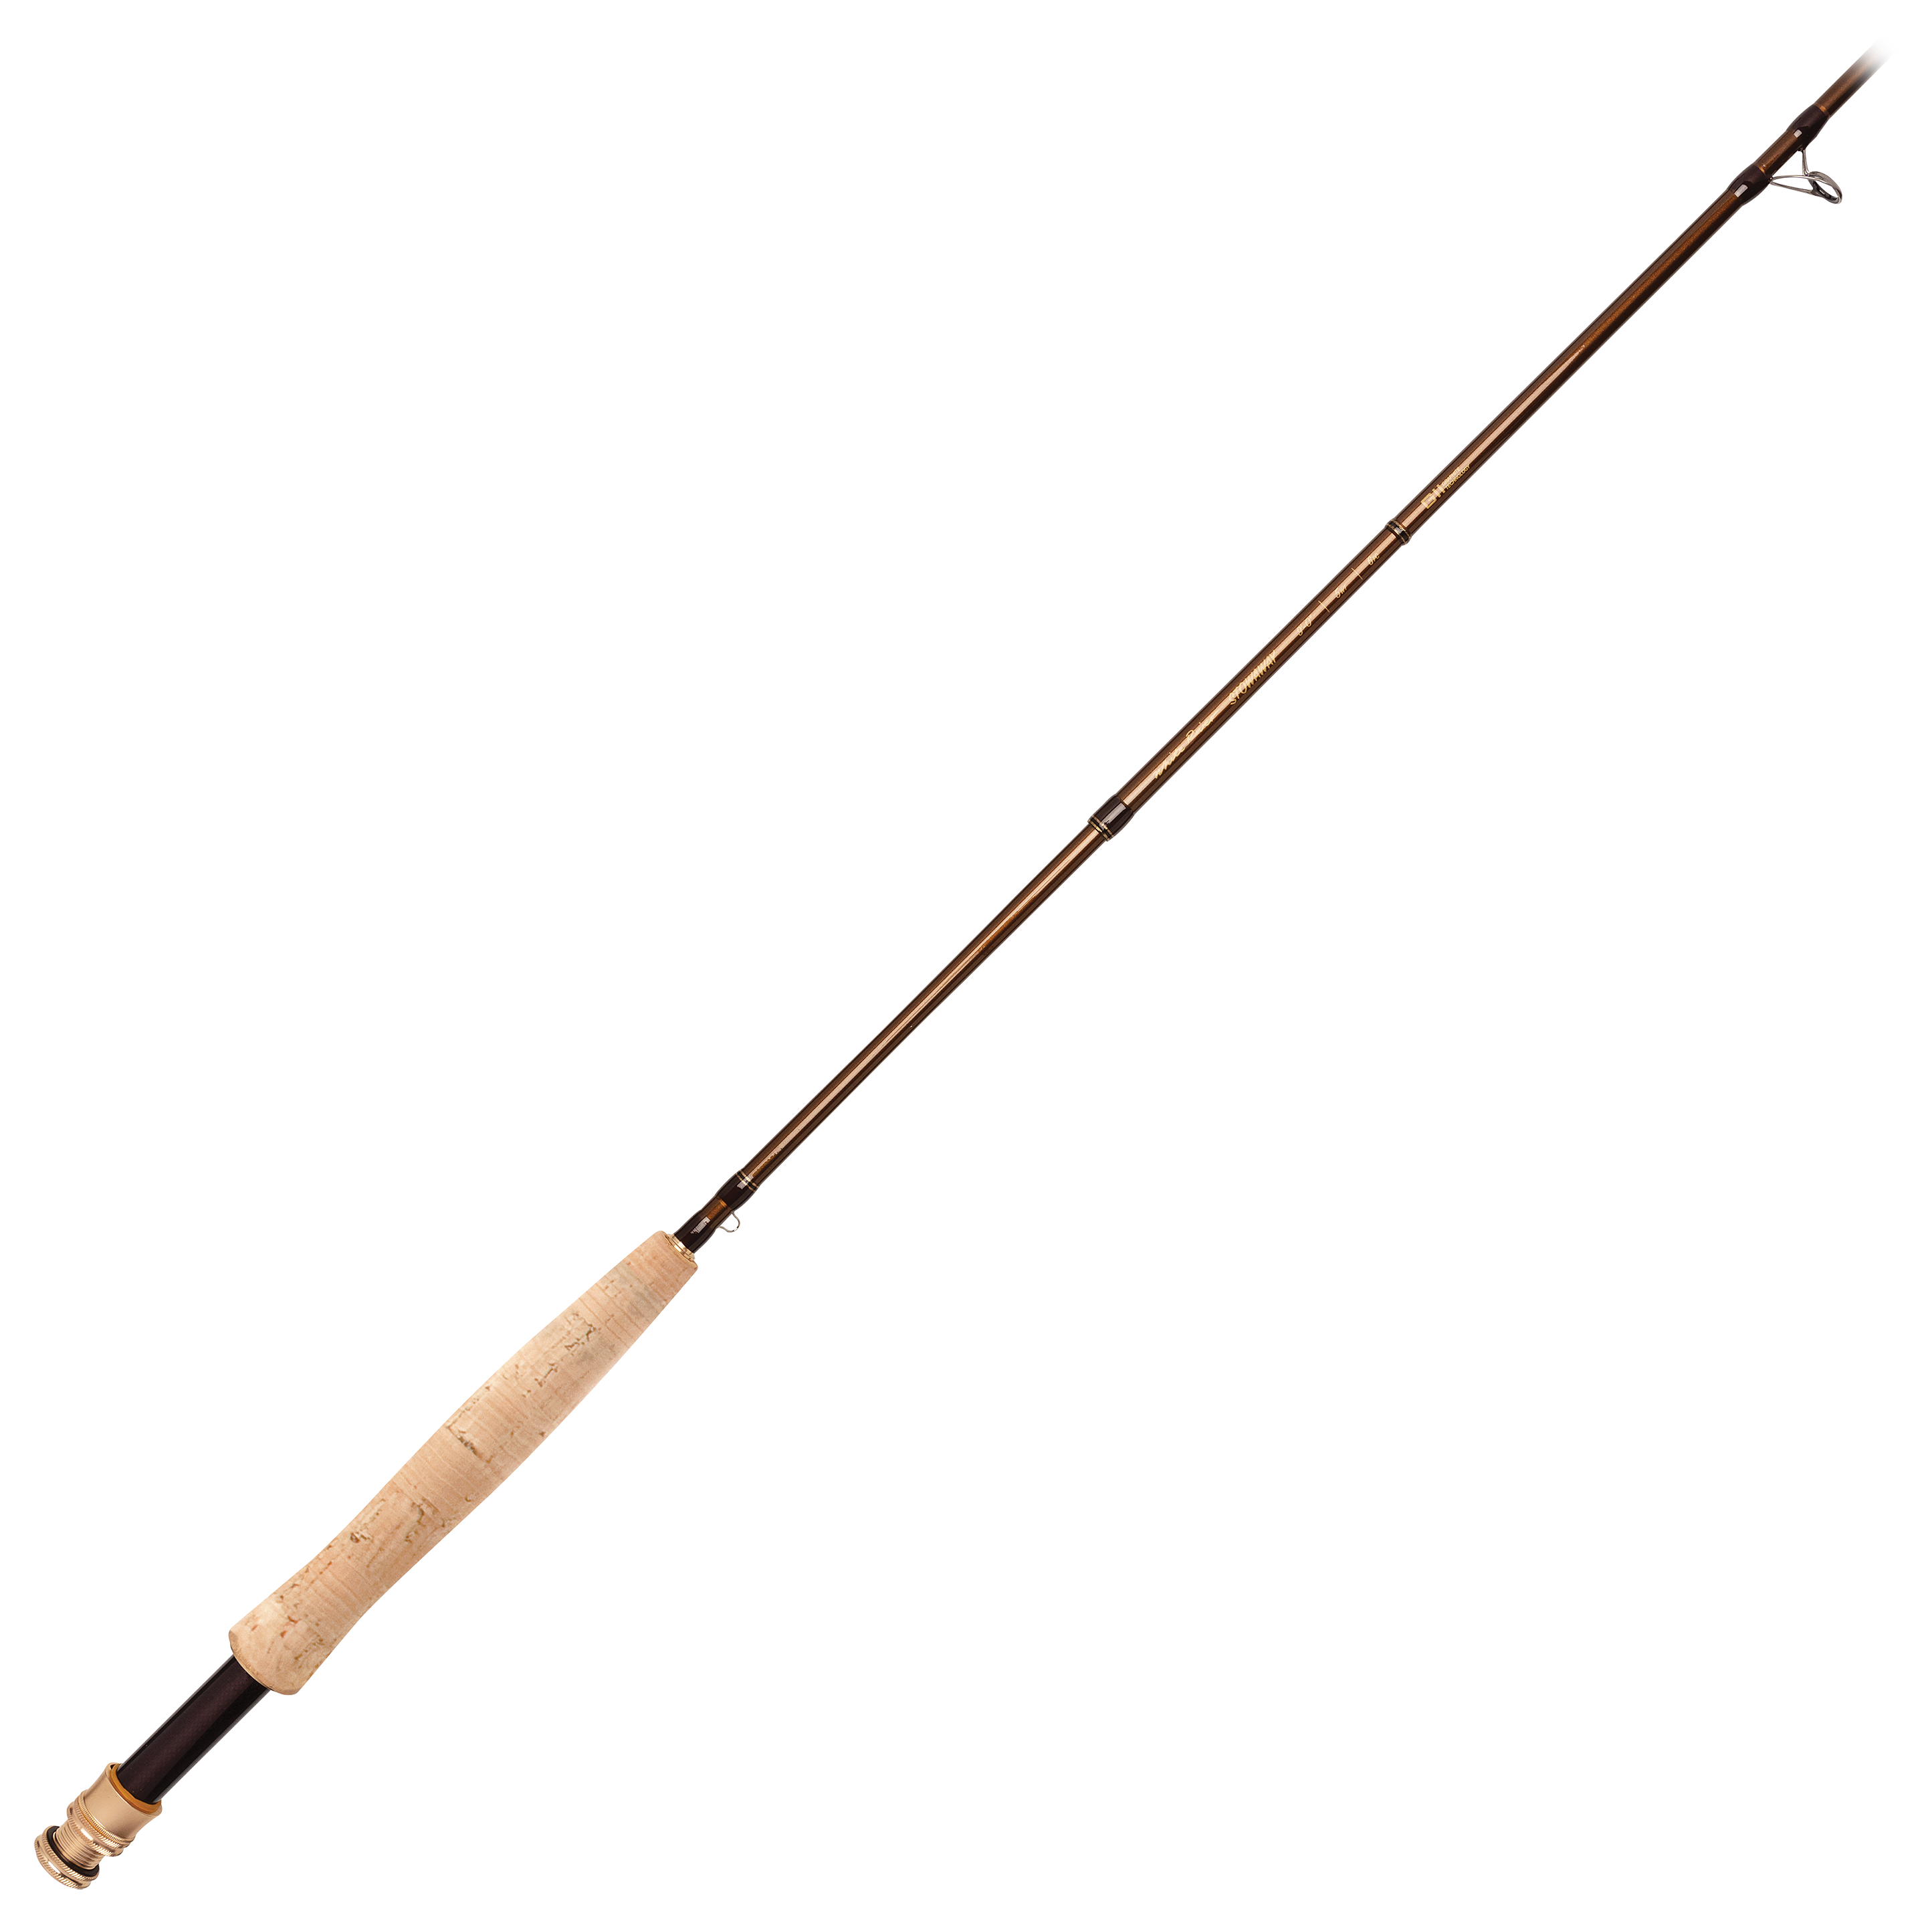 White River Fly Shop Stowaway Fly Rod - WRST865-6